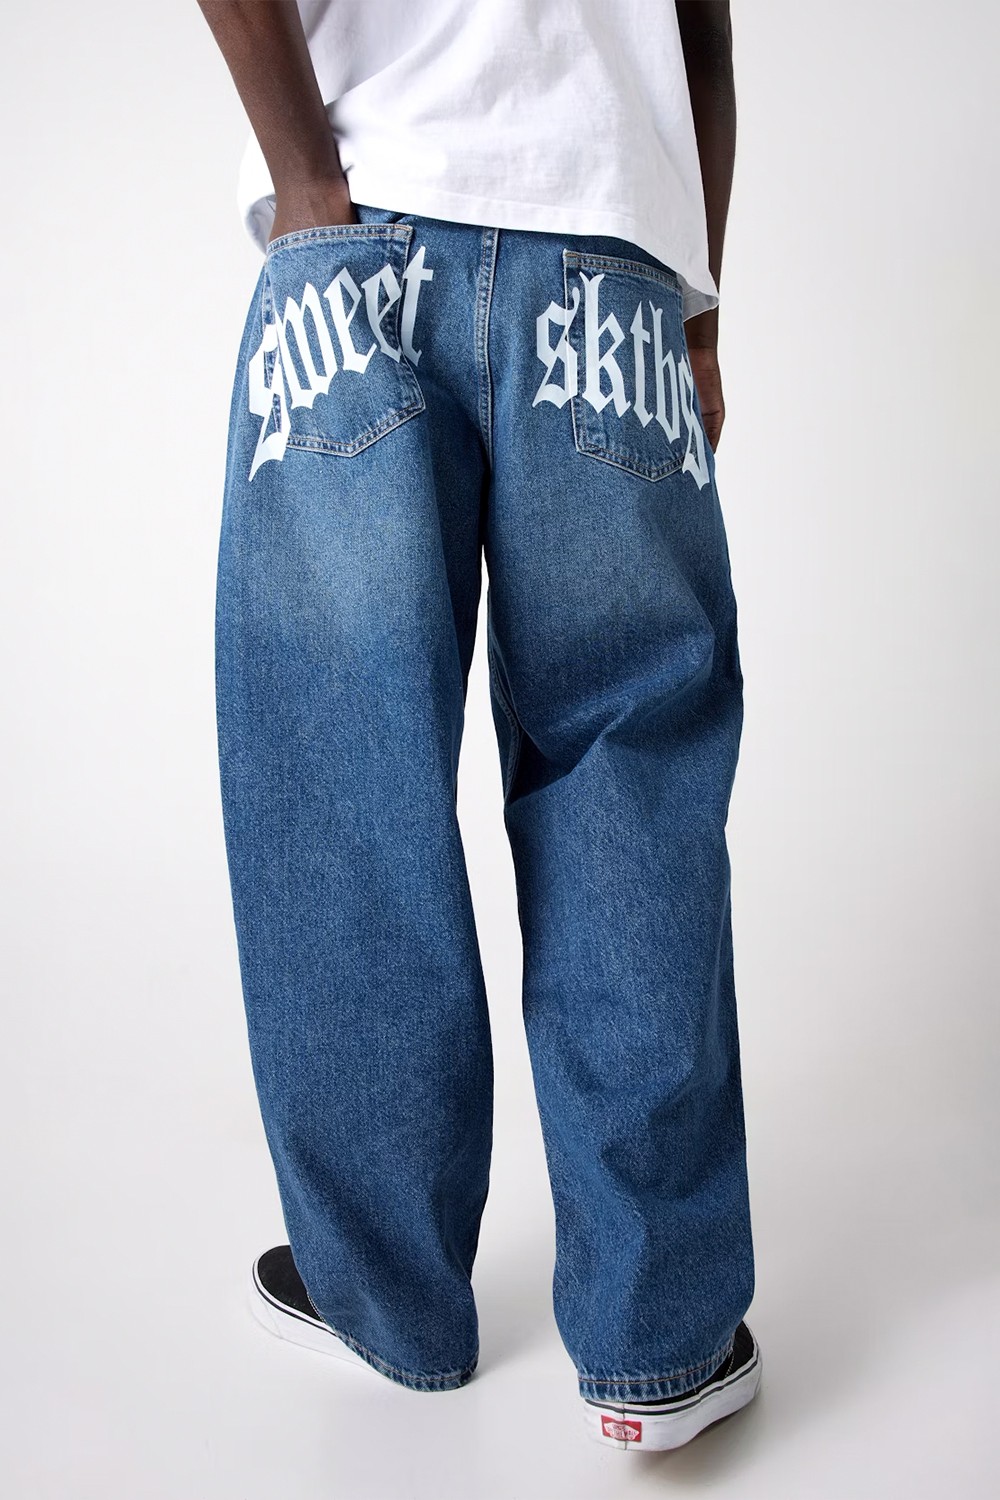 Baggy Skate Arch Jeans (SWT-14)